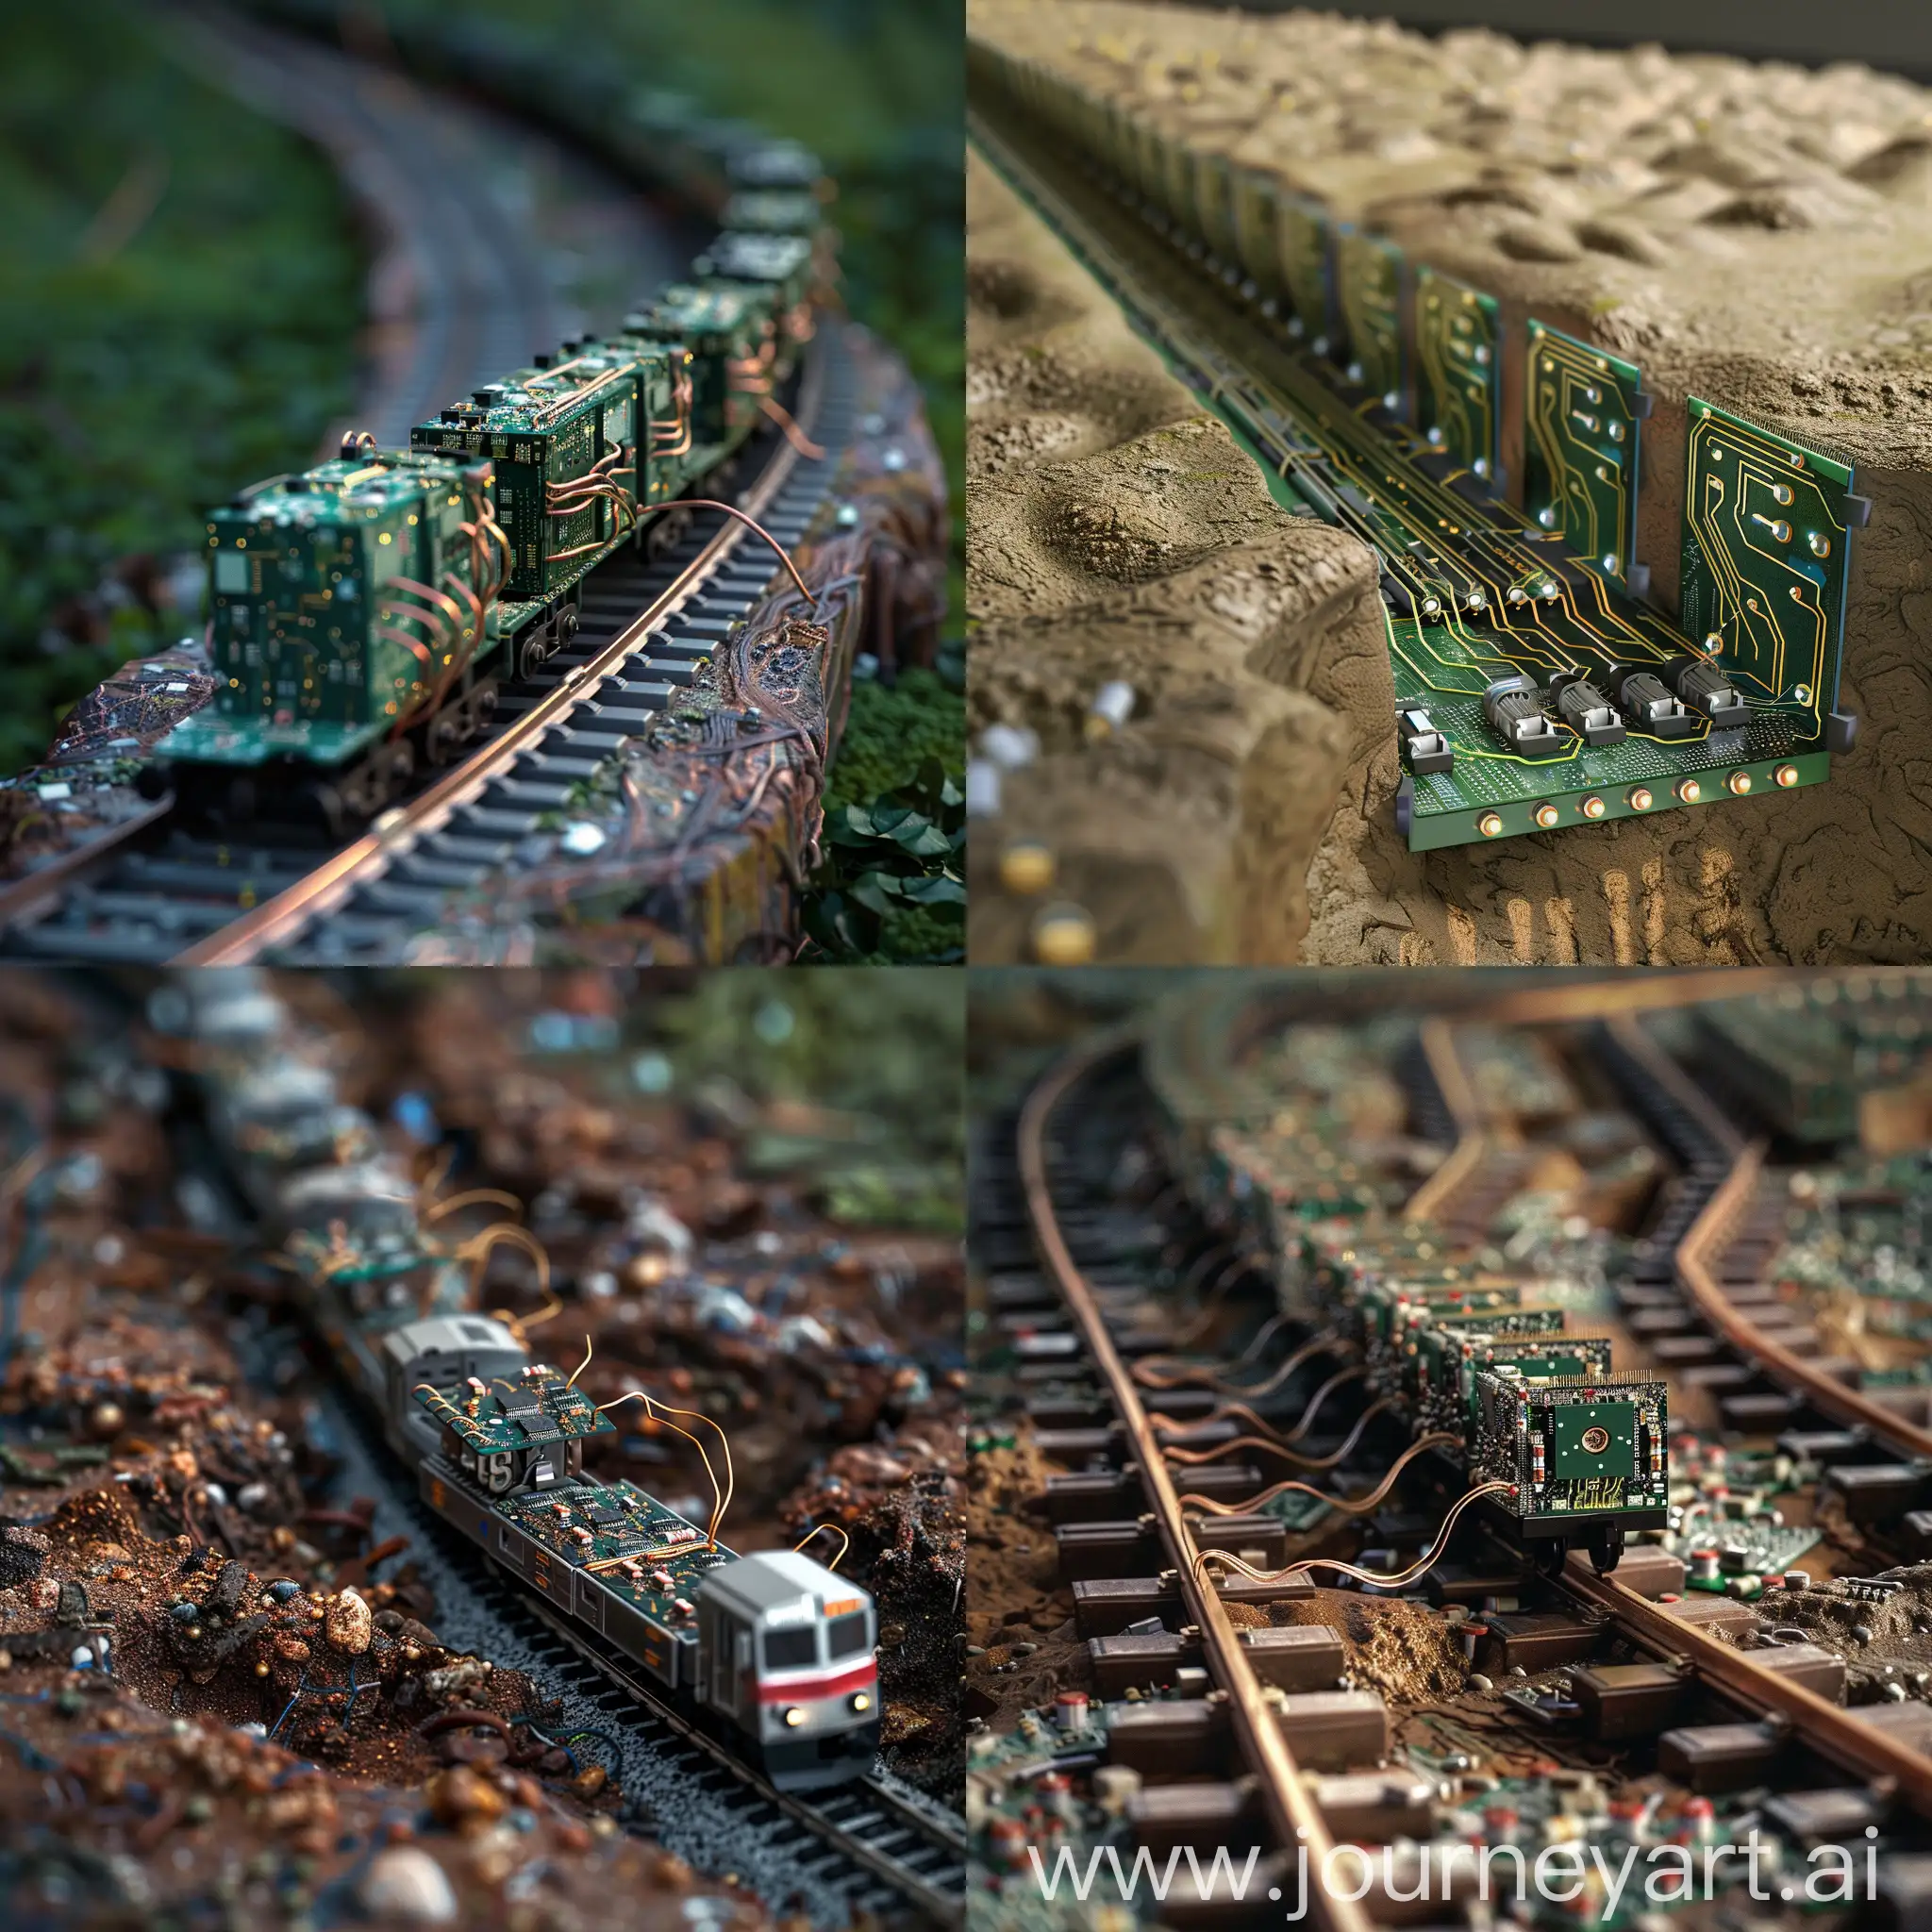 a train of microchips running wires into the ground